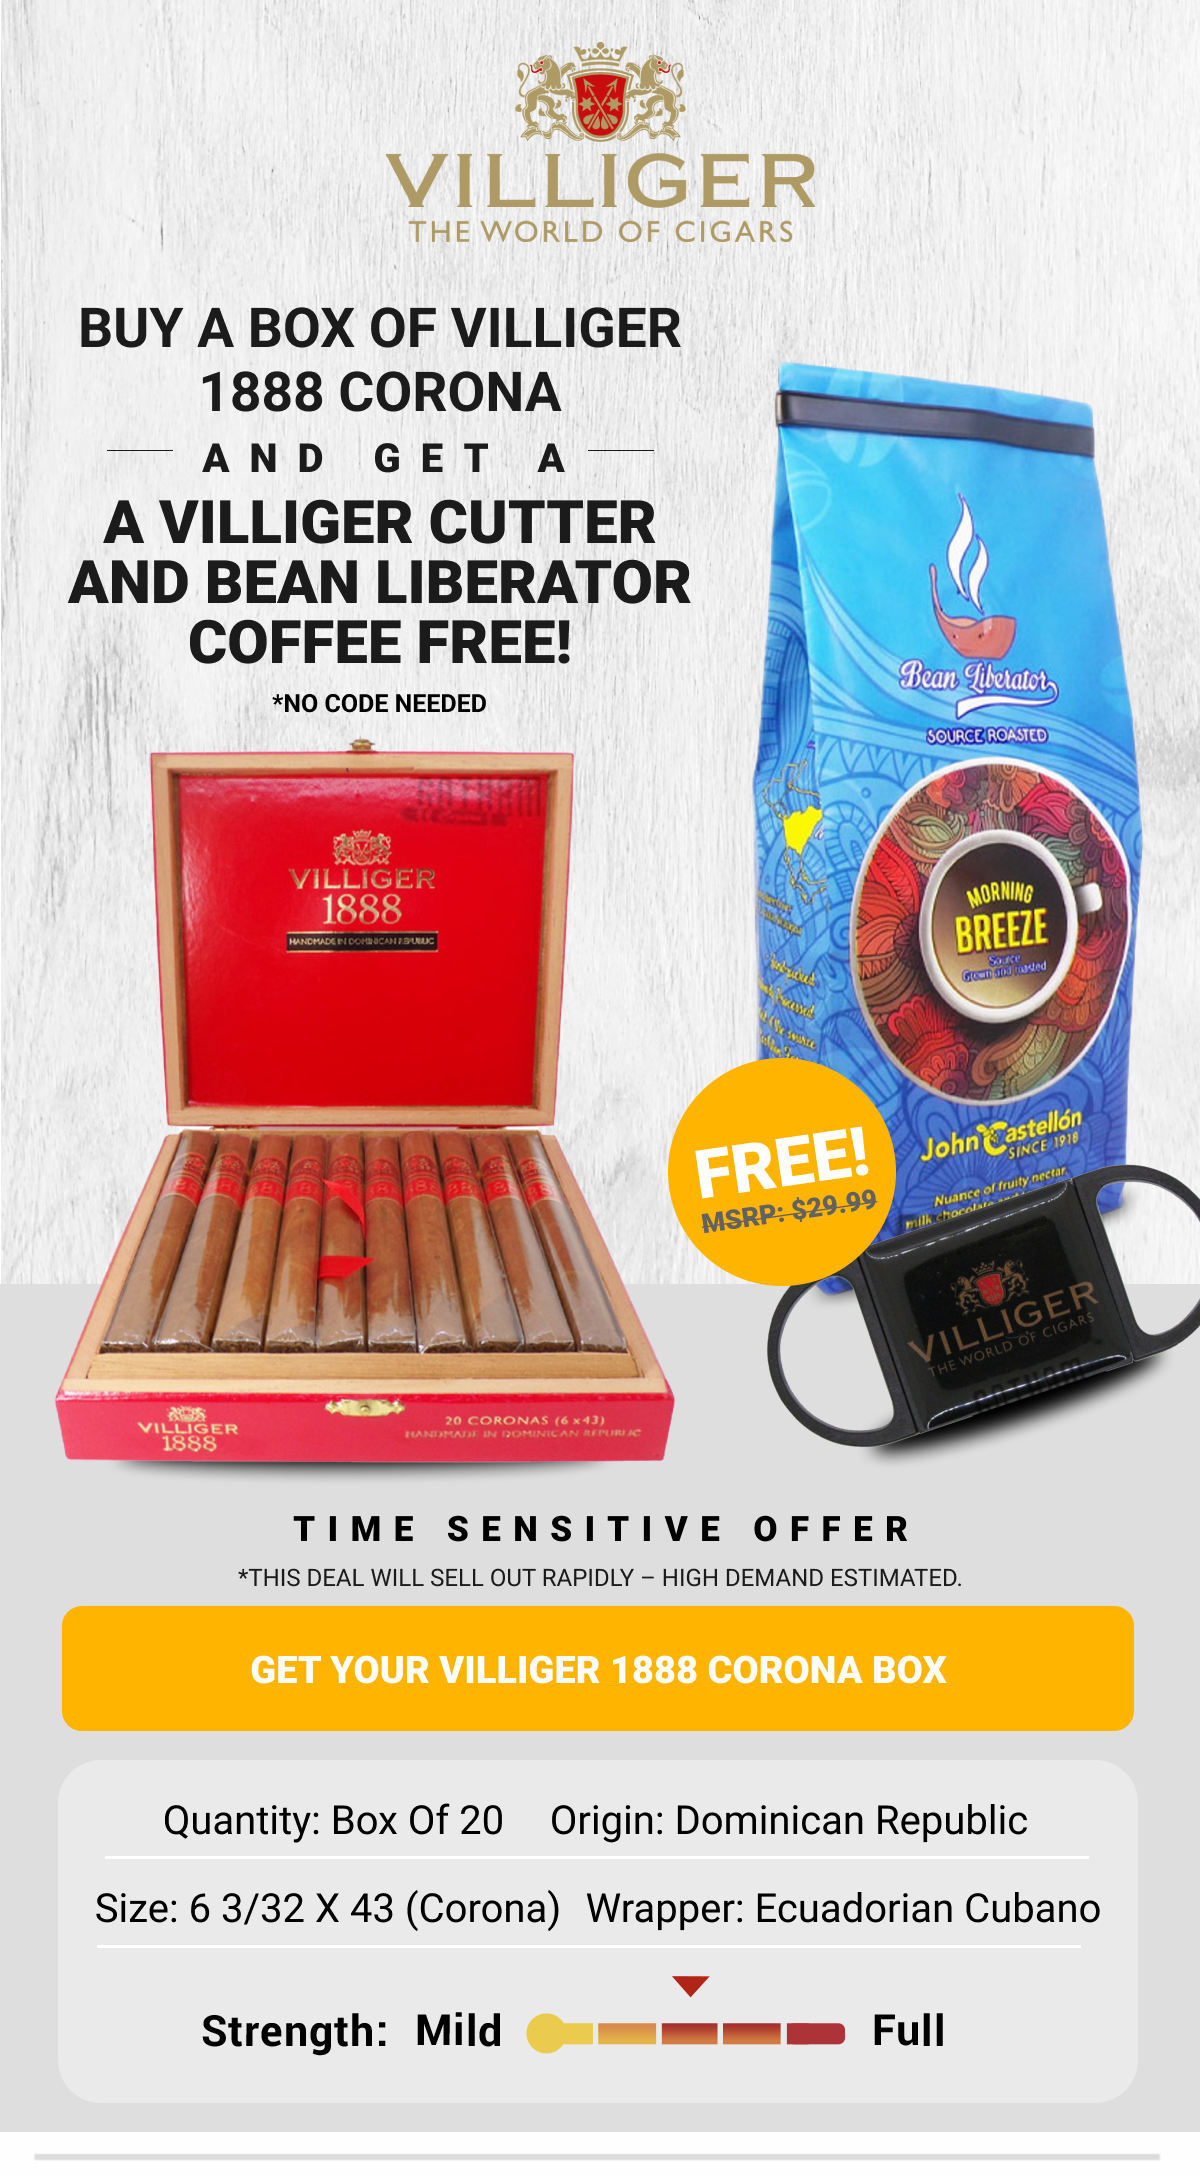 TIME SENSITIVE OFFER: BUY A BOX OF VILLIGER 1888 CORONA, AND GET A VILLIGER CUTTER AND BEAN LIBERATOR COFFEE FREE!